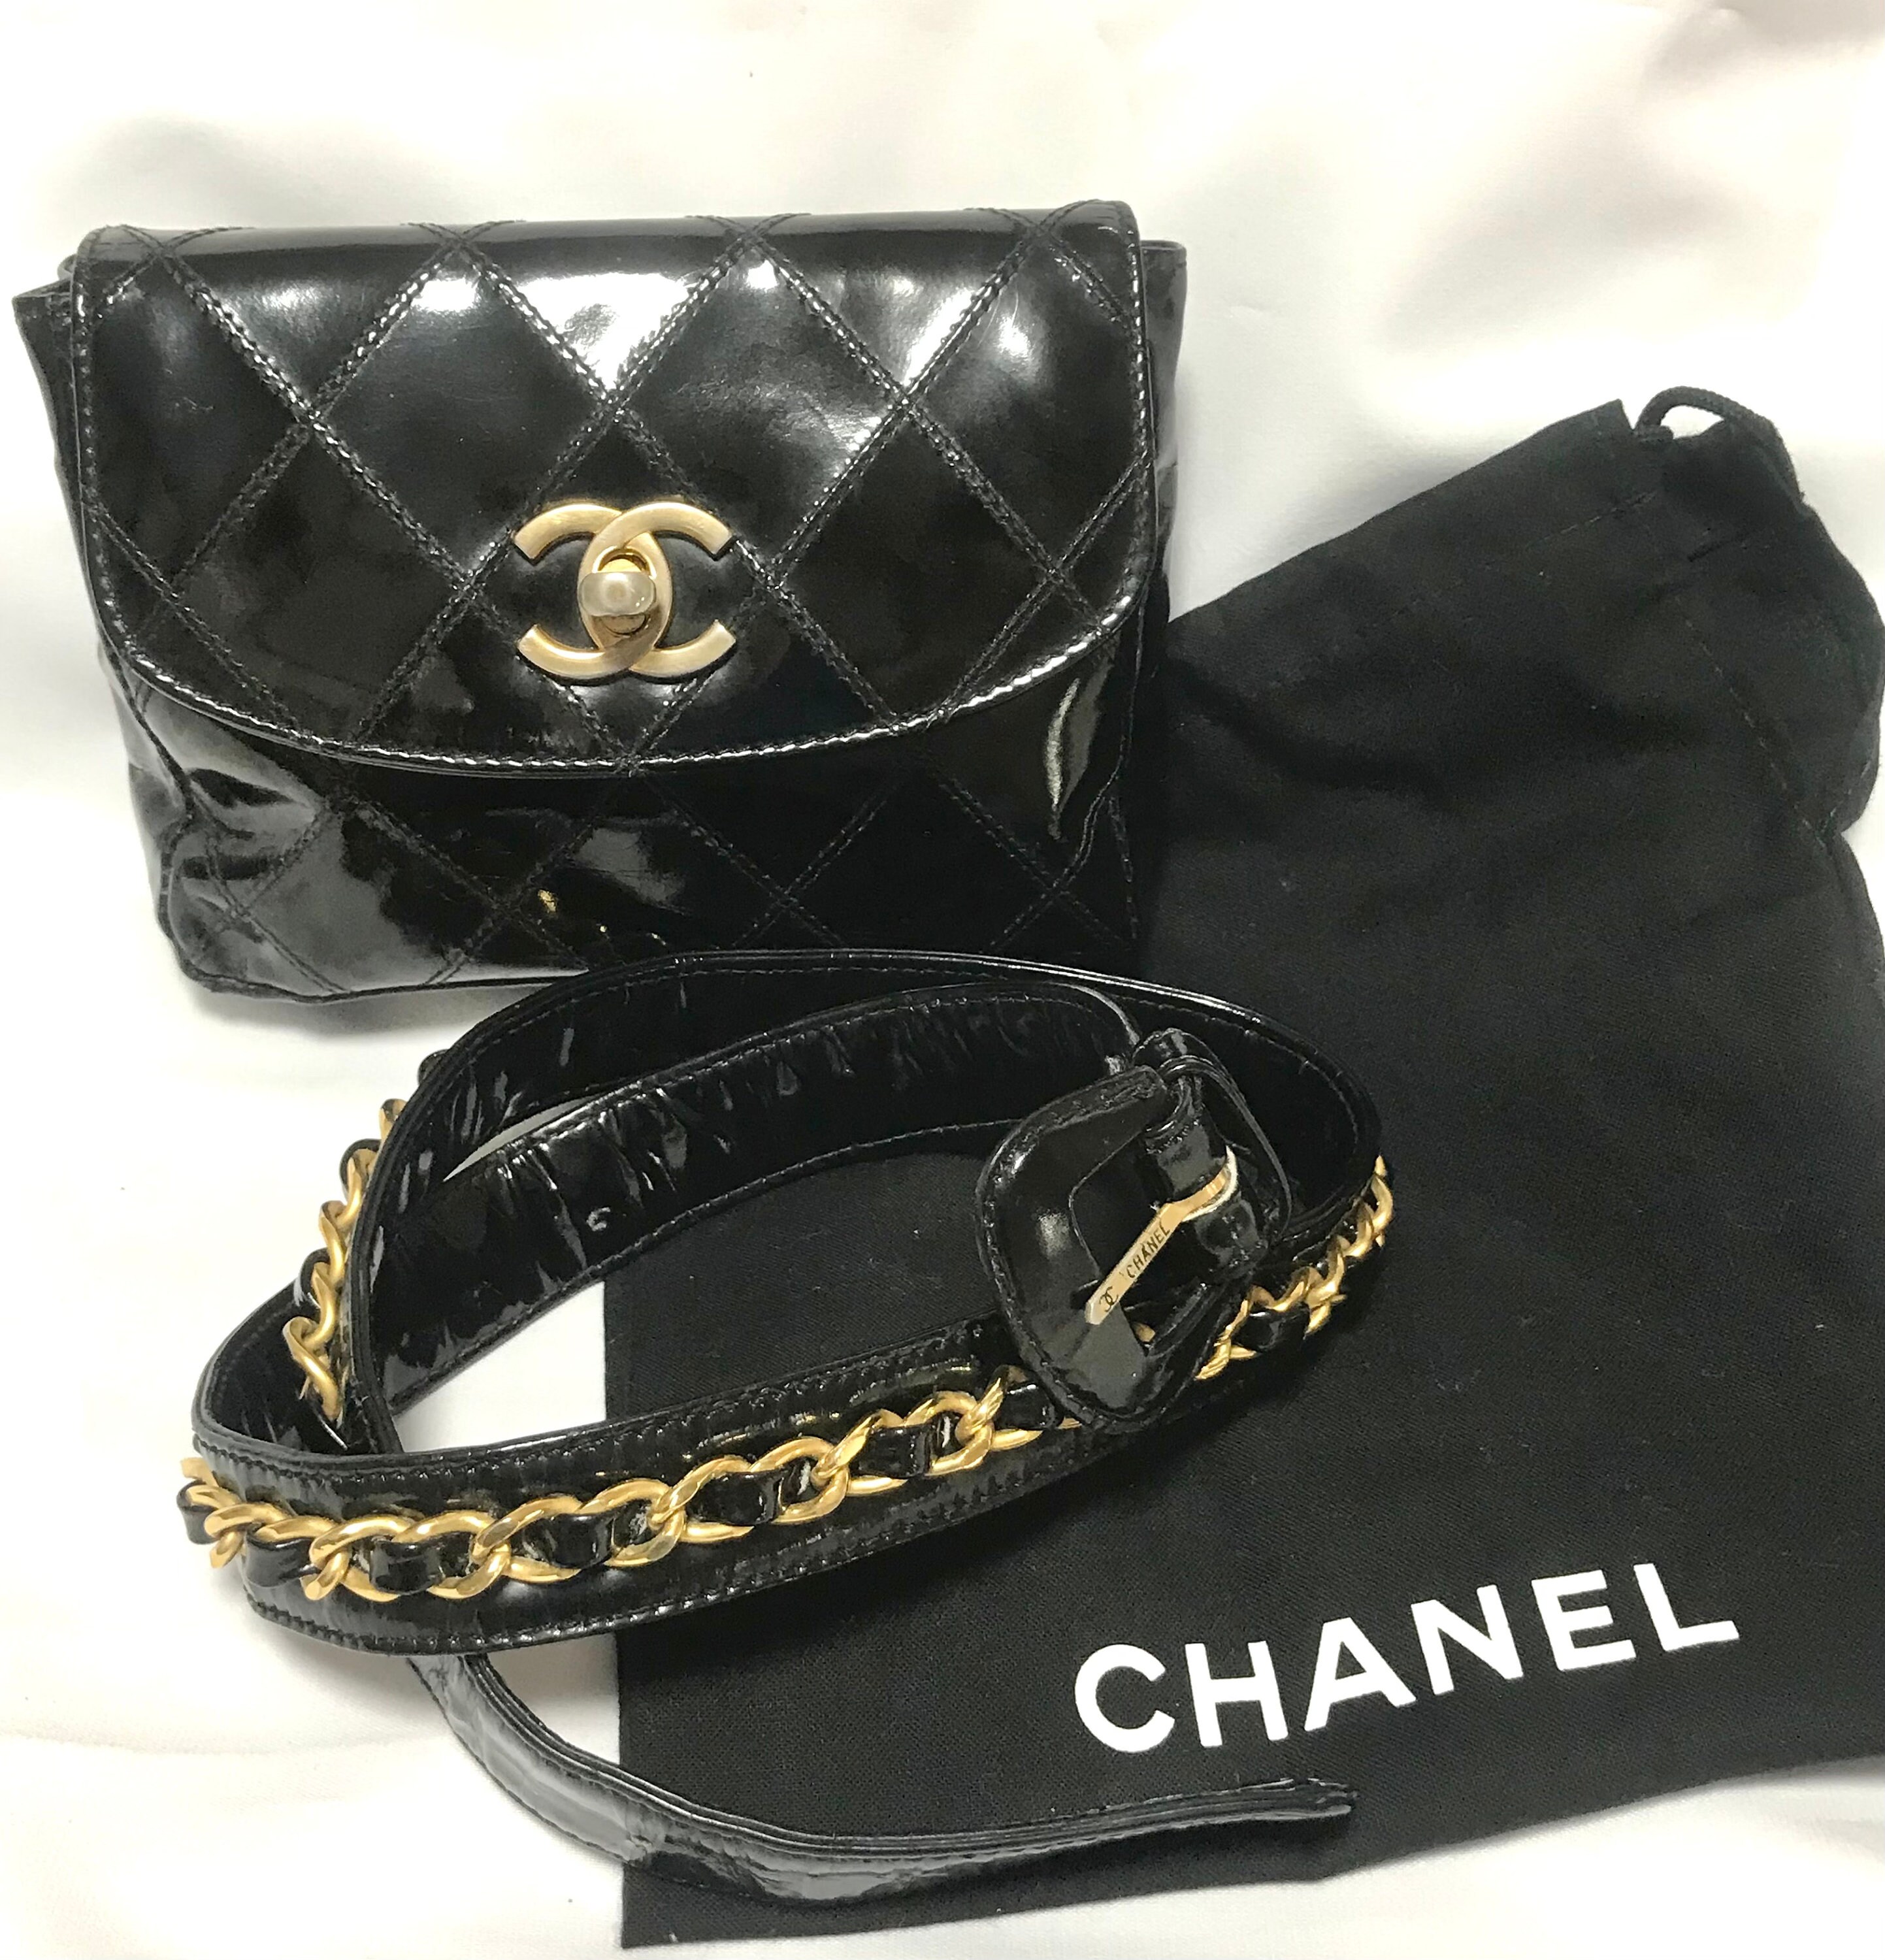 Chanel Black Quilted Patent Leather Large Boy Bag Ruthenium Hardware, 2012- 2013 Available For Immediate Sale At Sotheby's